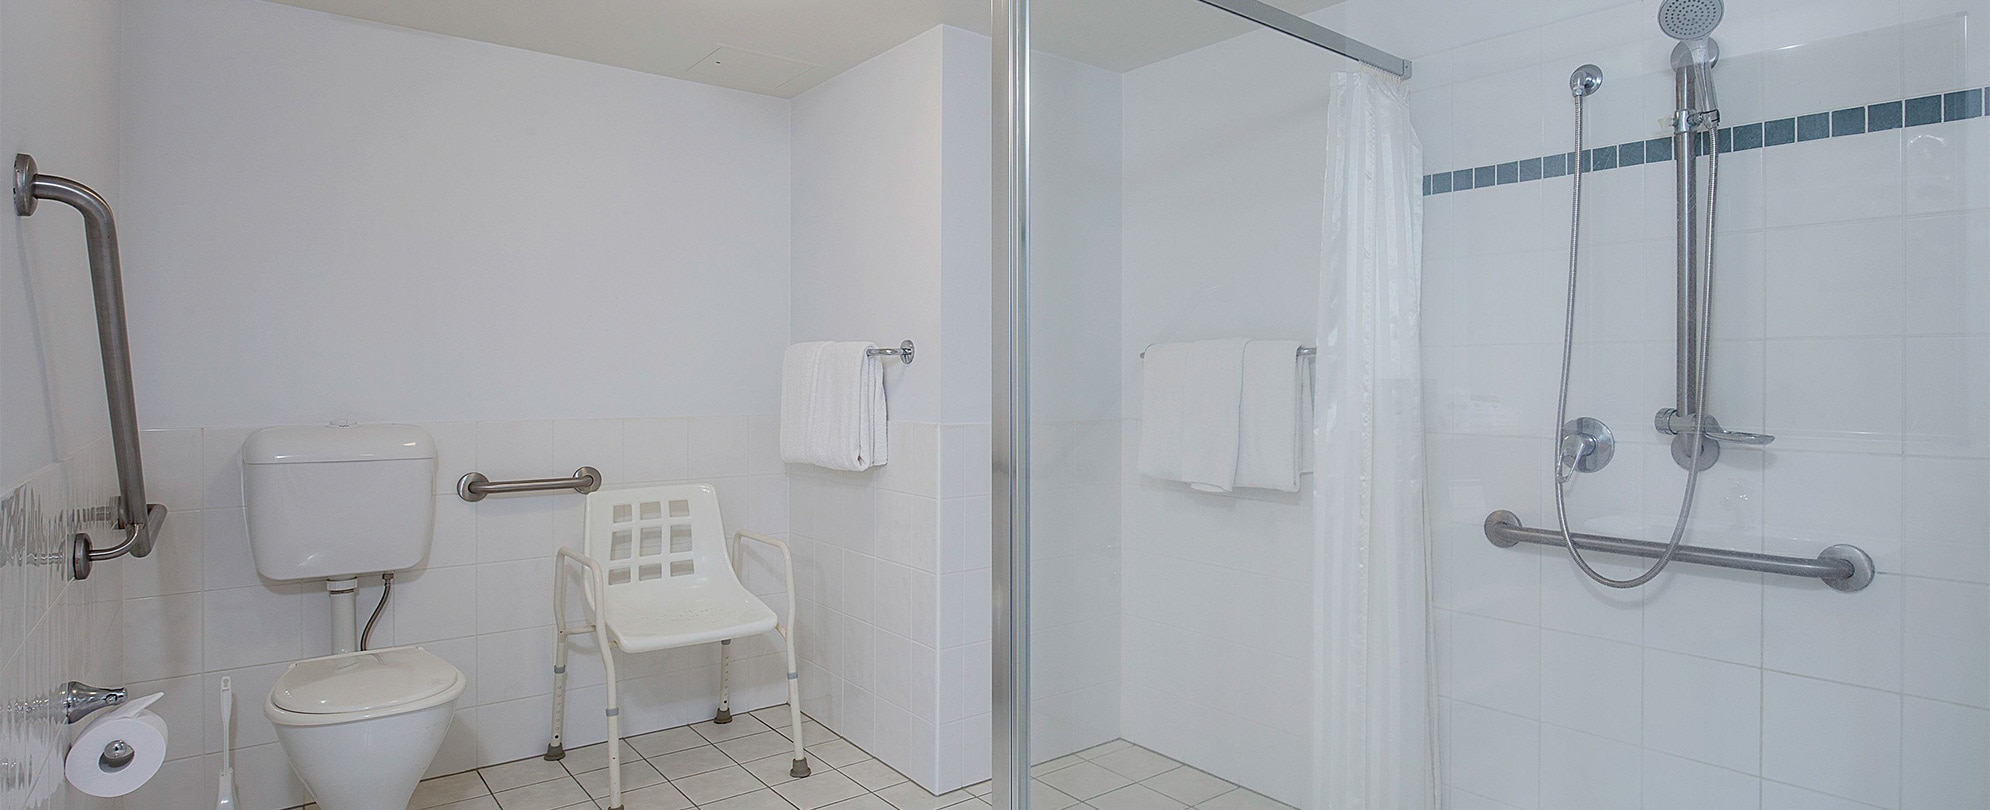 A shower, toilet, and a shower chair in the bathroom of a Club Wyndham Kirra Beach handicap accessible suite. 